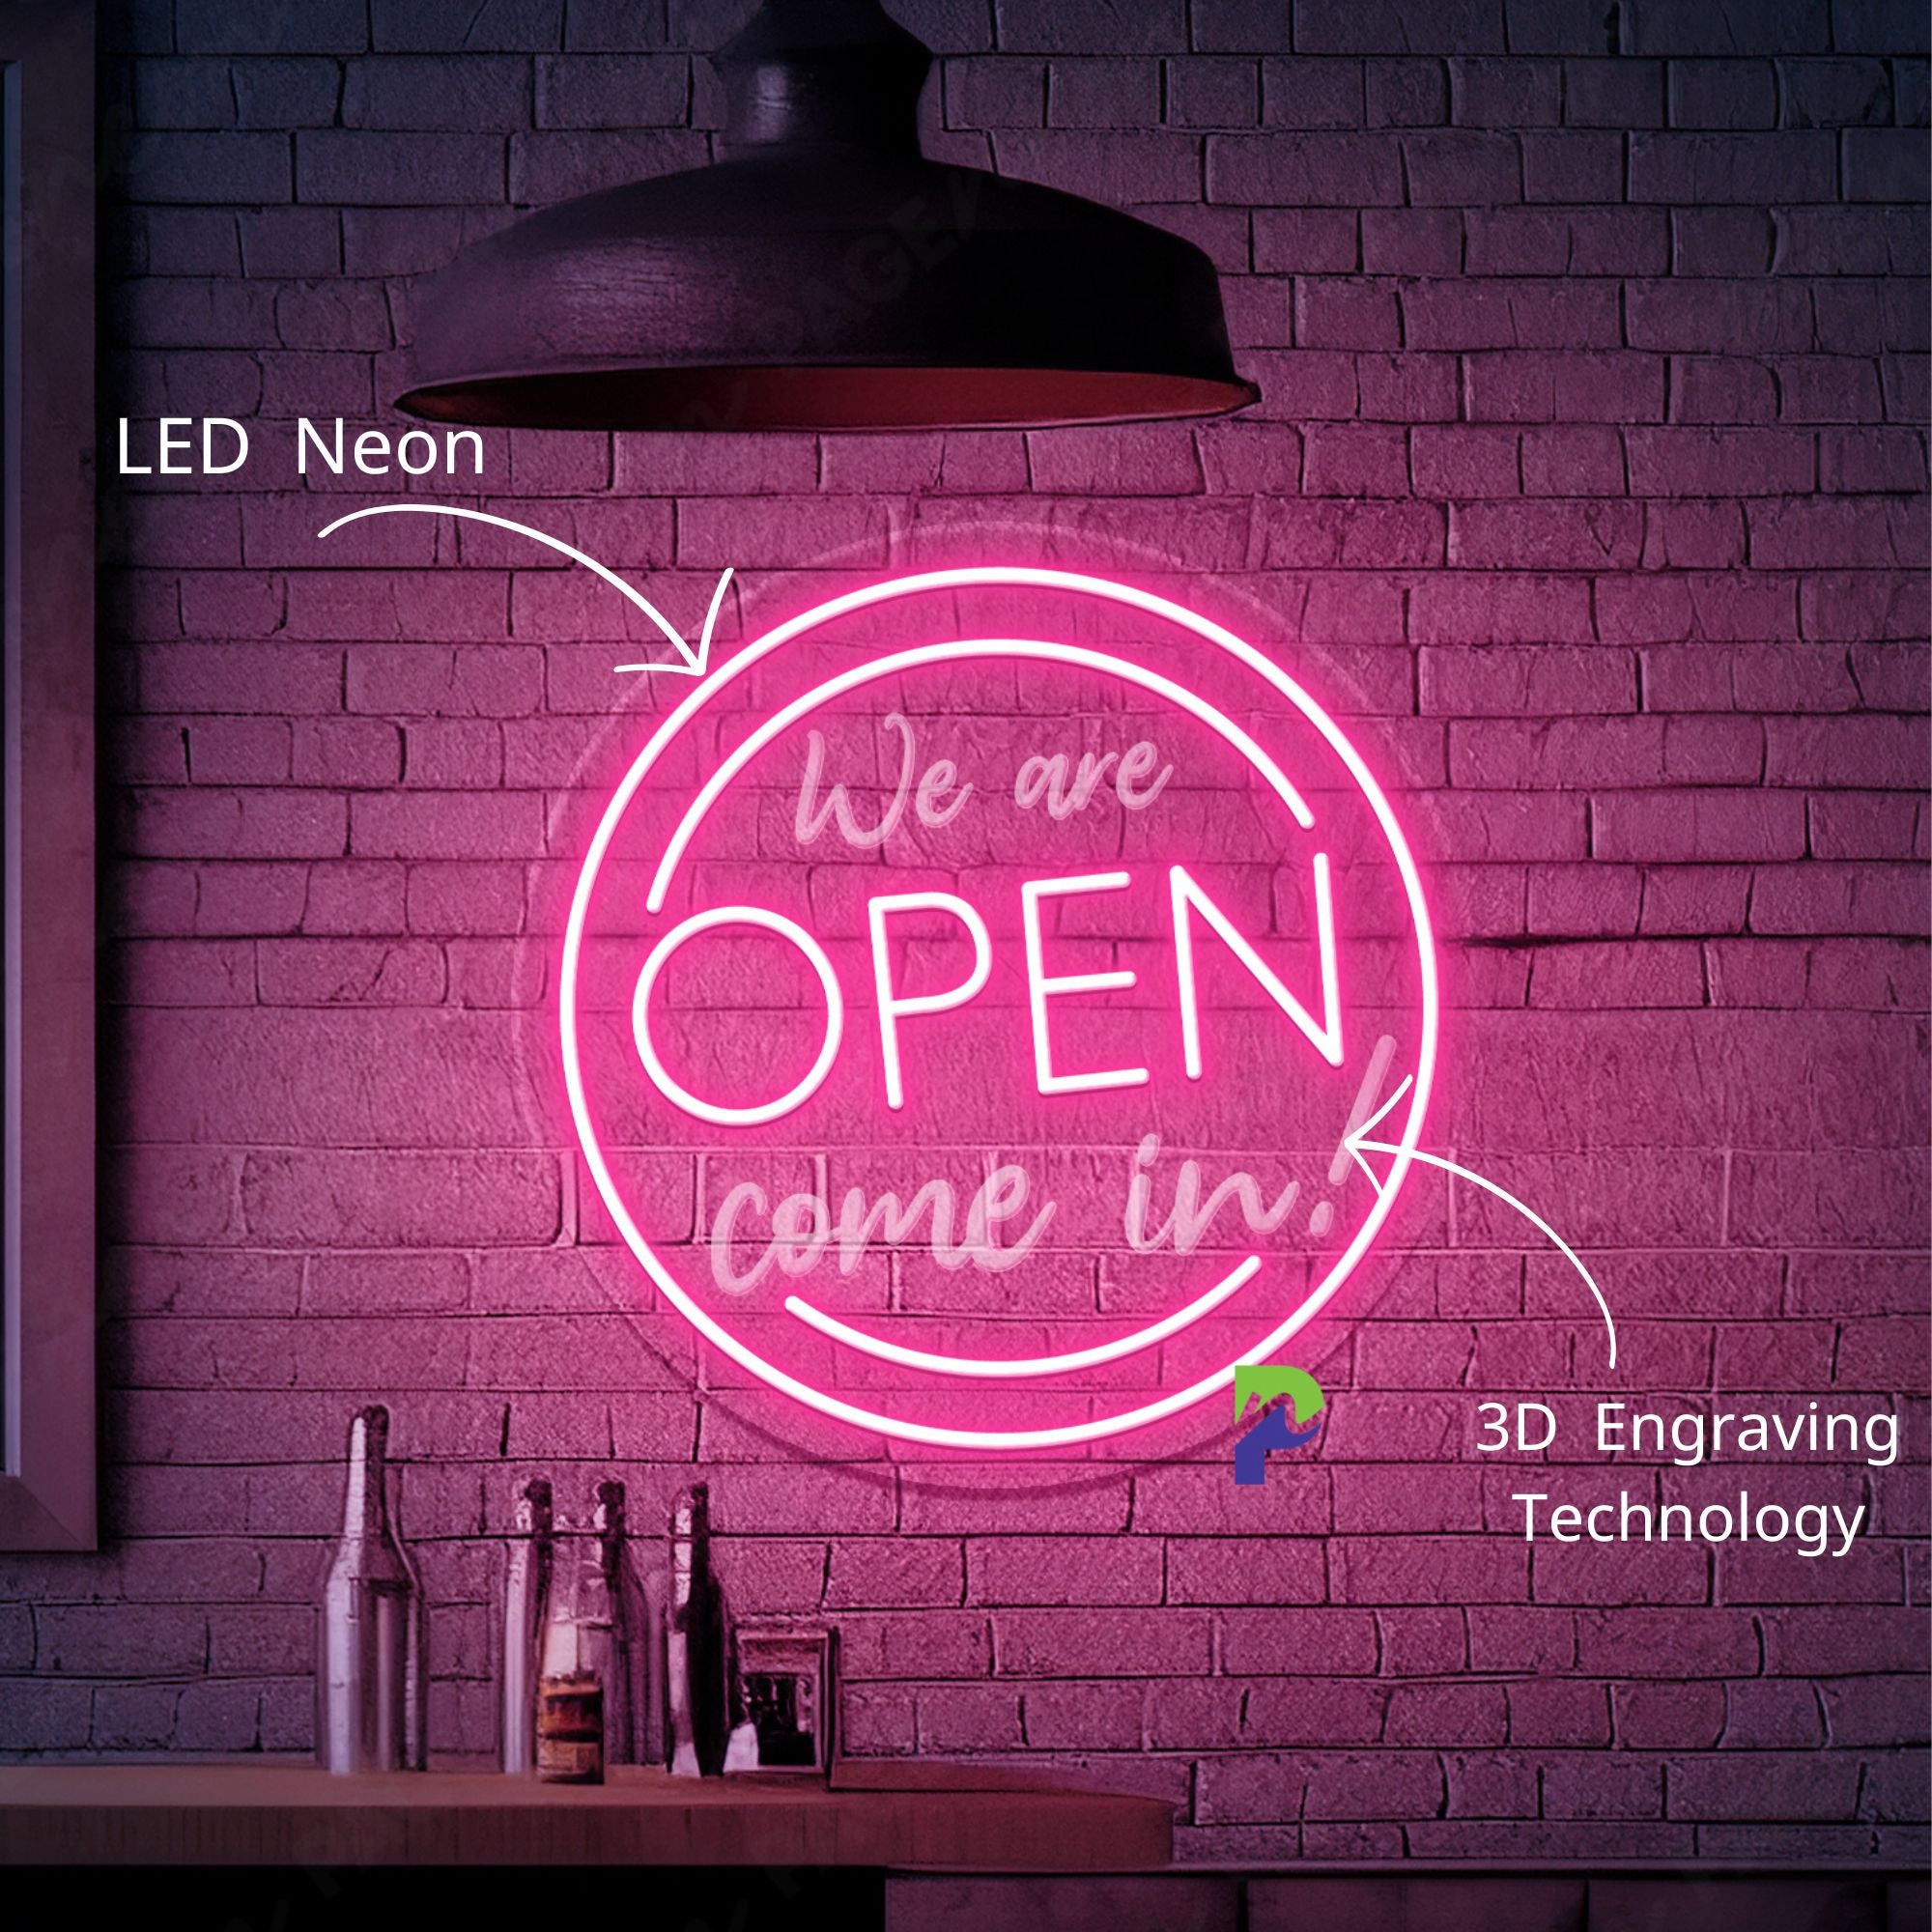 We Are Open Come In Neon Sign Led Light For Business